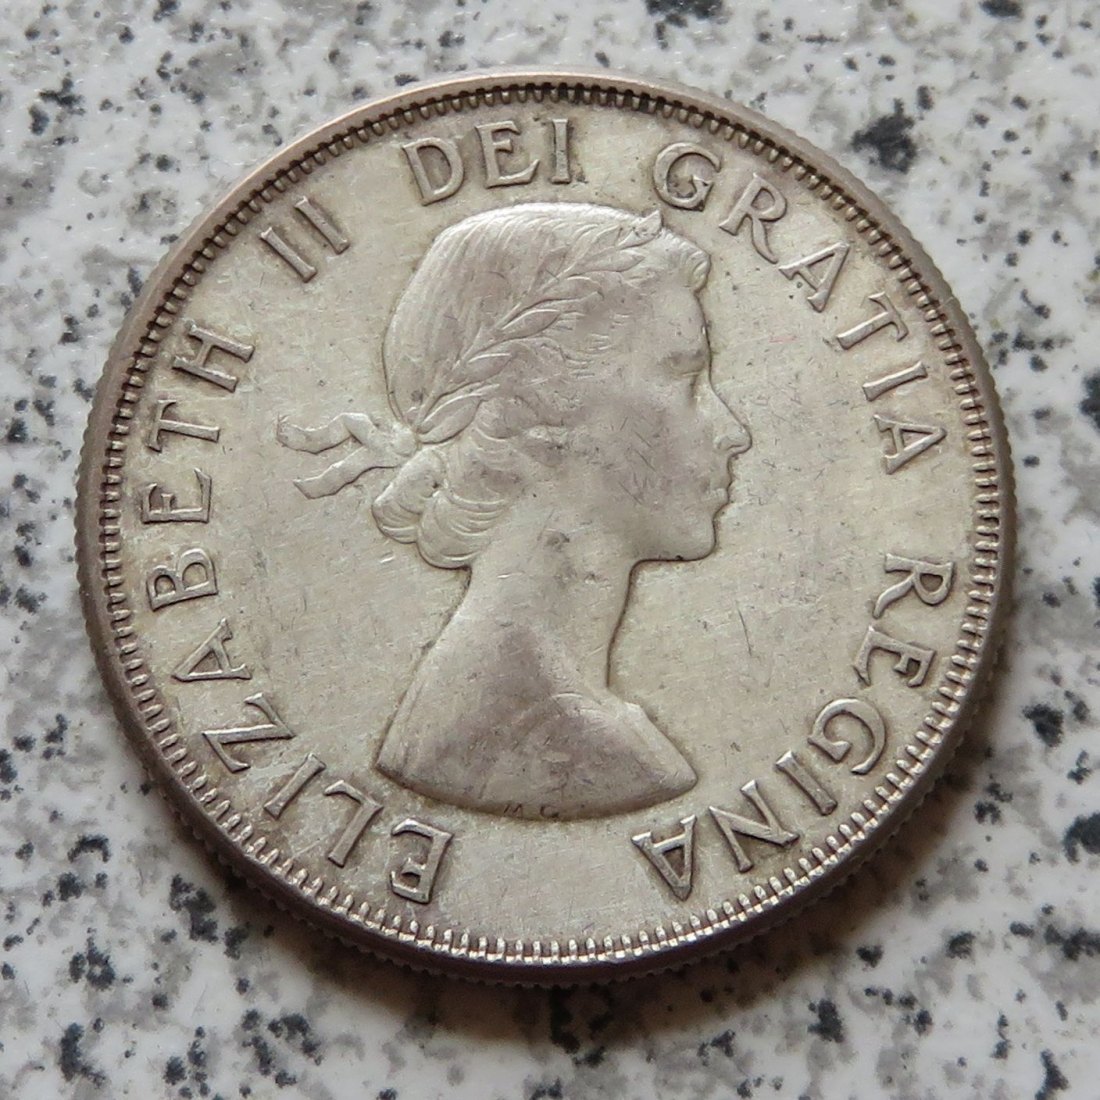  Canada 50 Cents 1959   